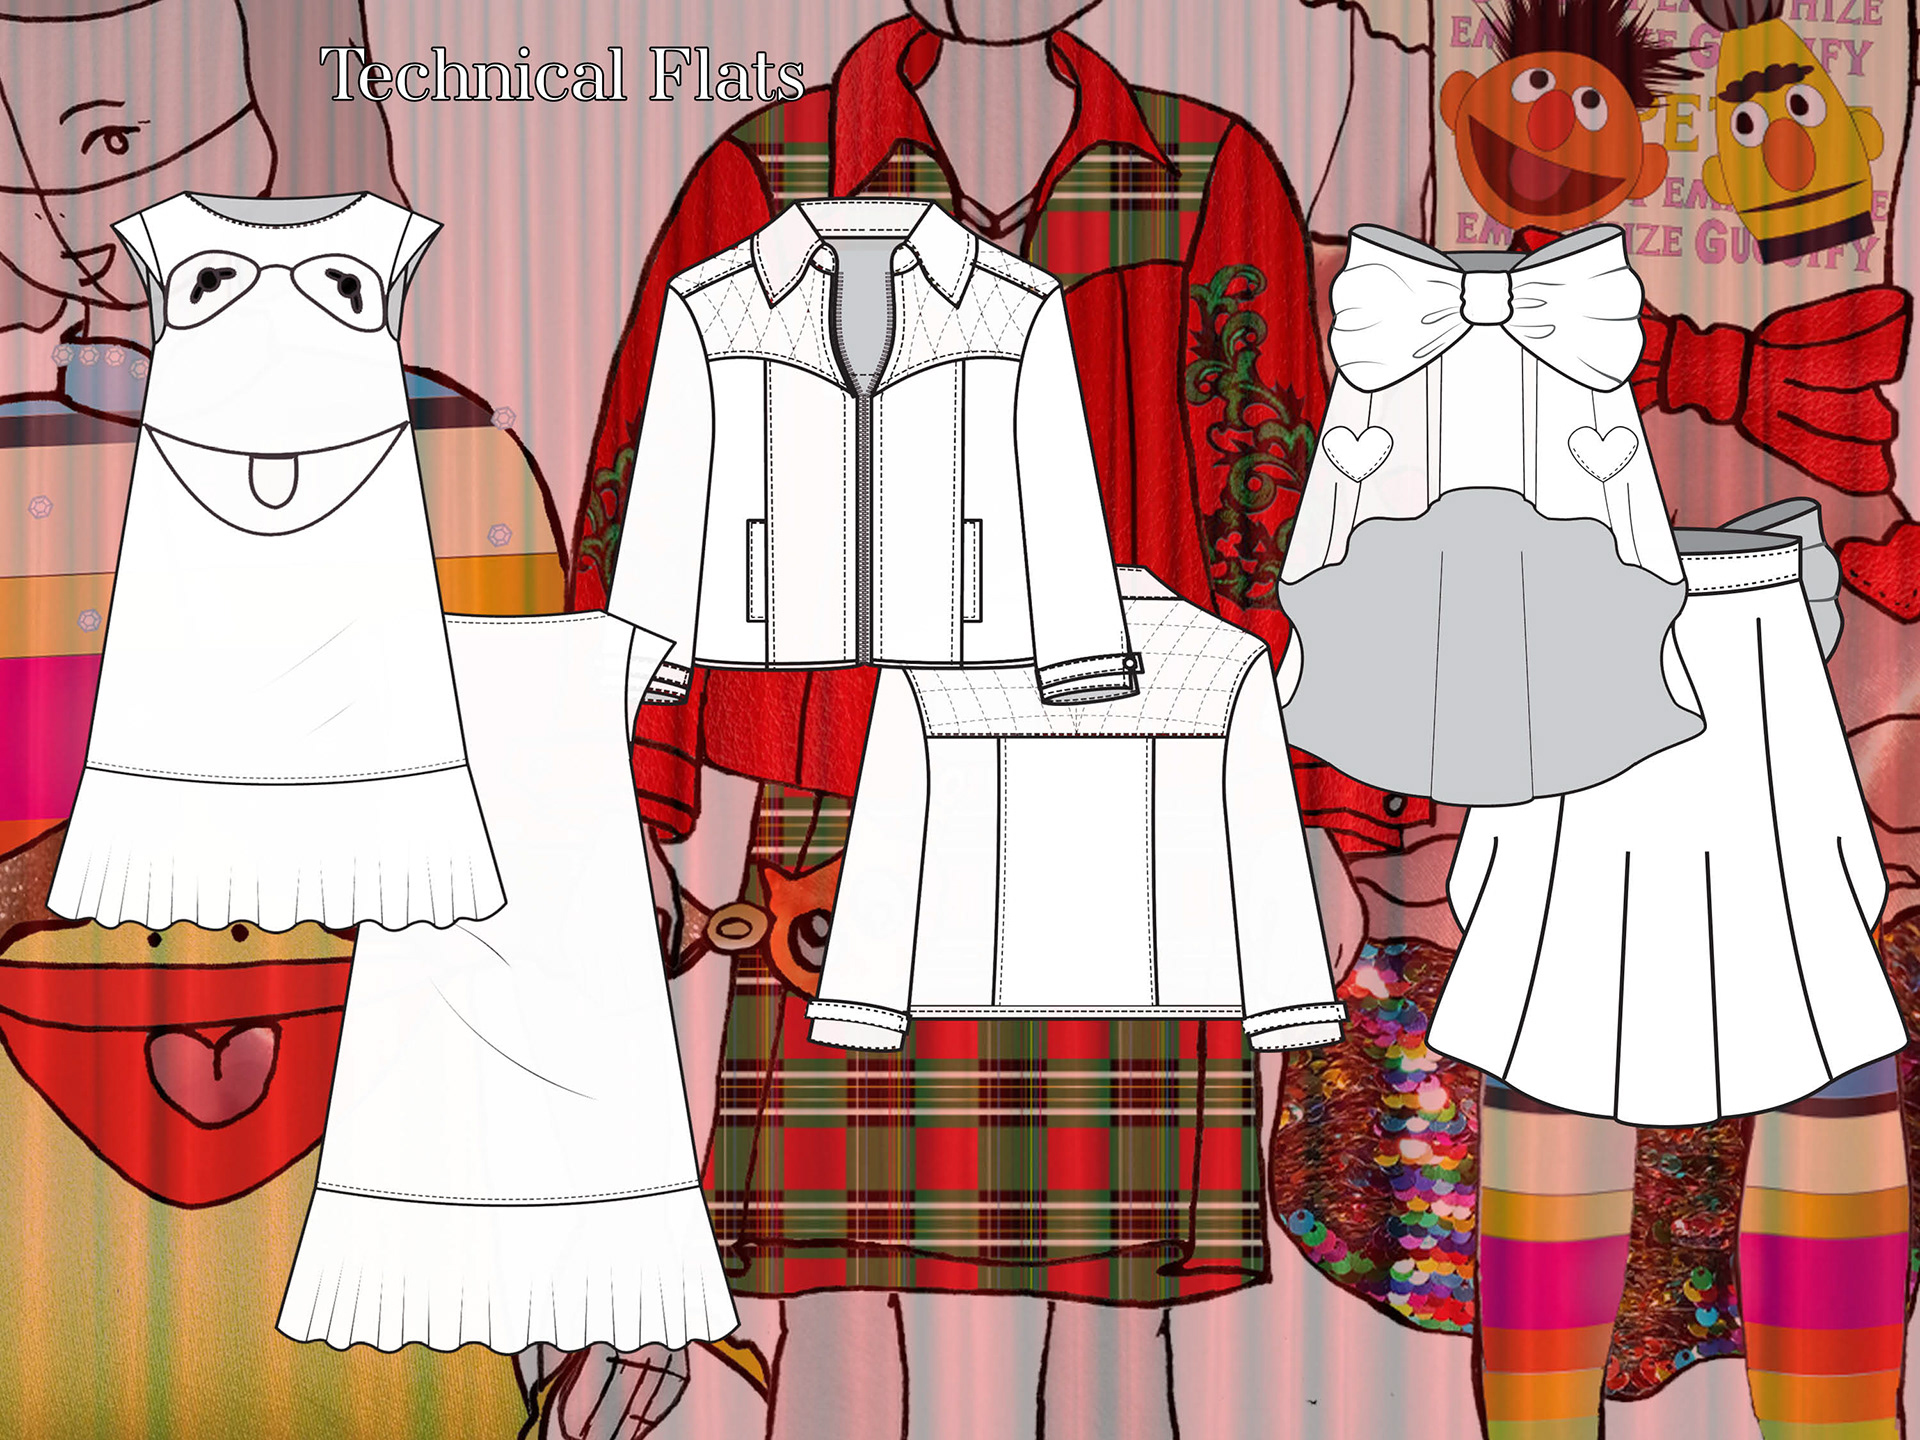 Meredith Levy - The Muppets X Gucci Kids : FSF Case Study